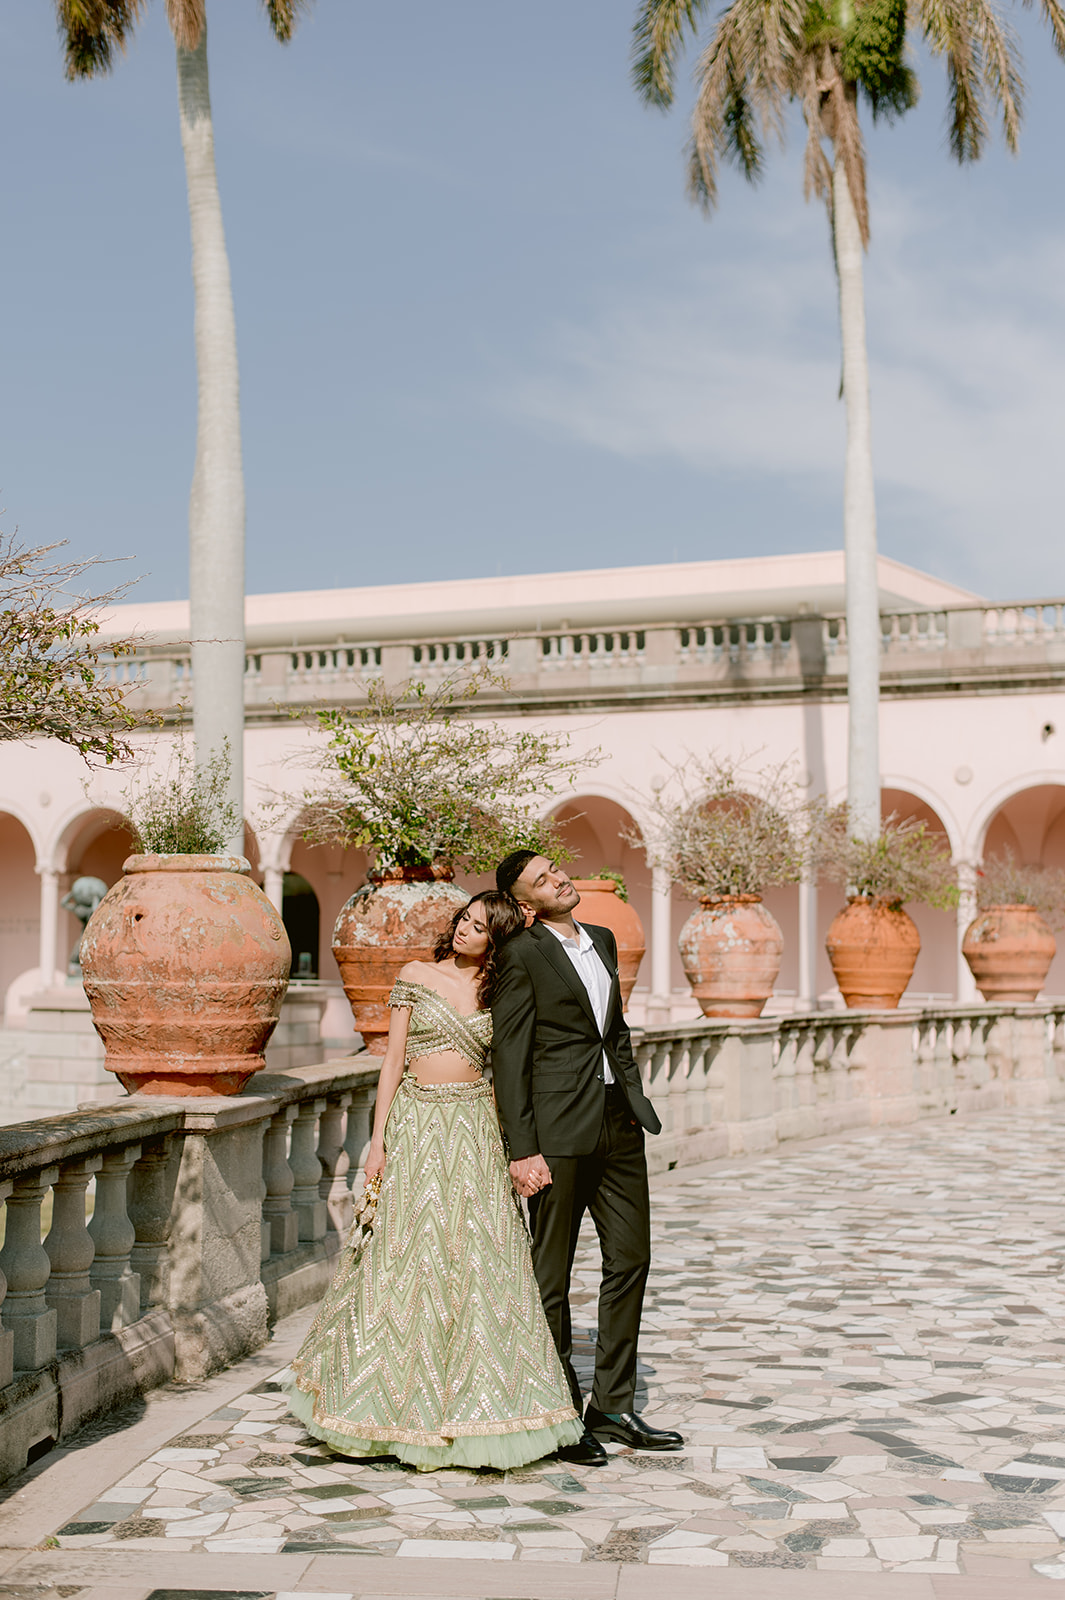 "Ringling Museum engagement shoot features beautiful Indian couple and stunning architecture"
